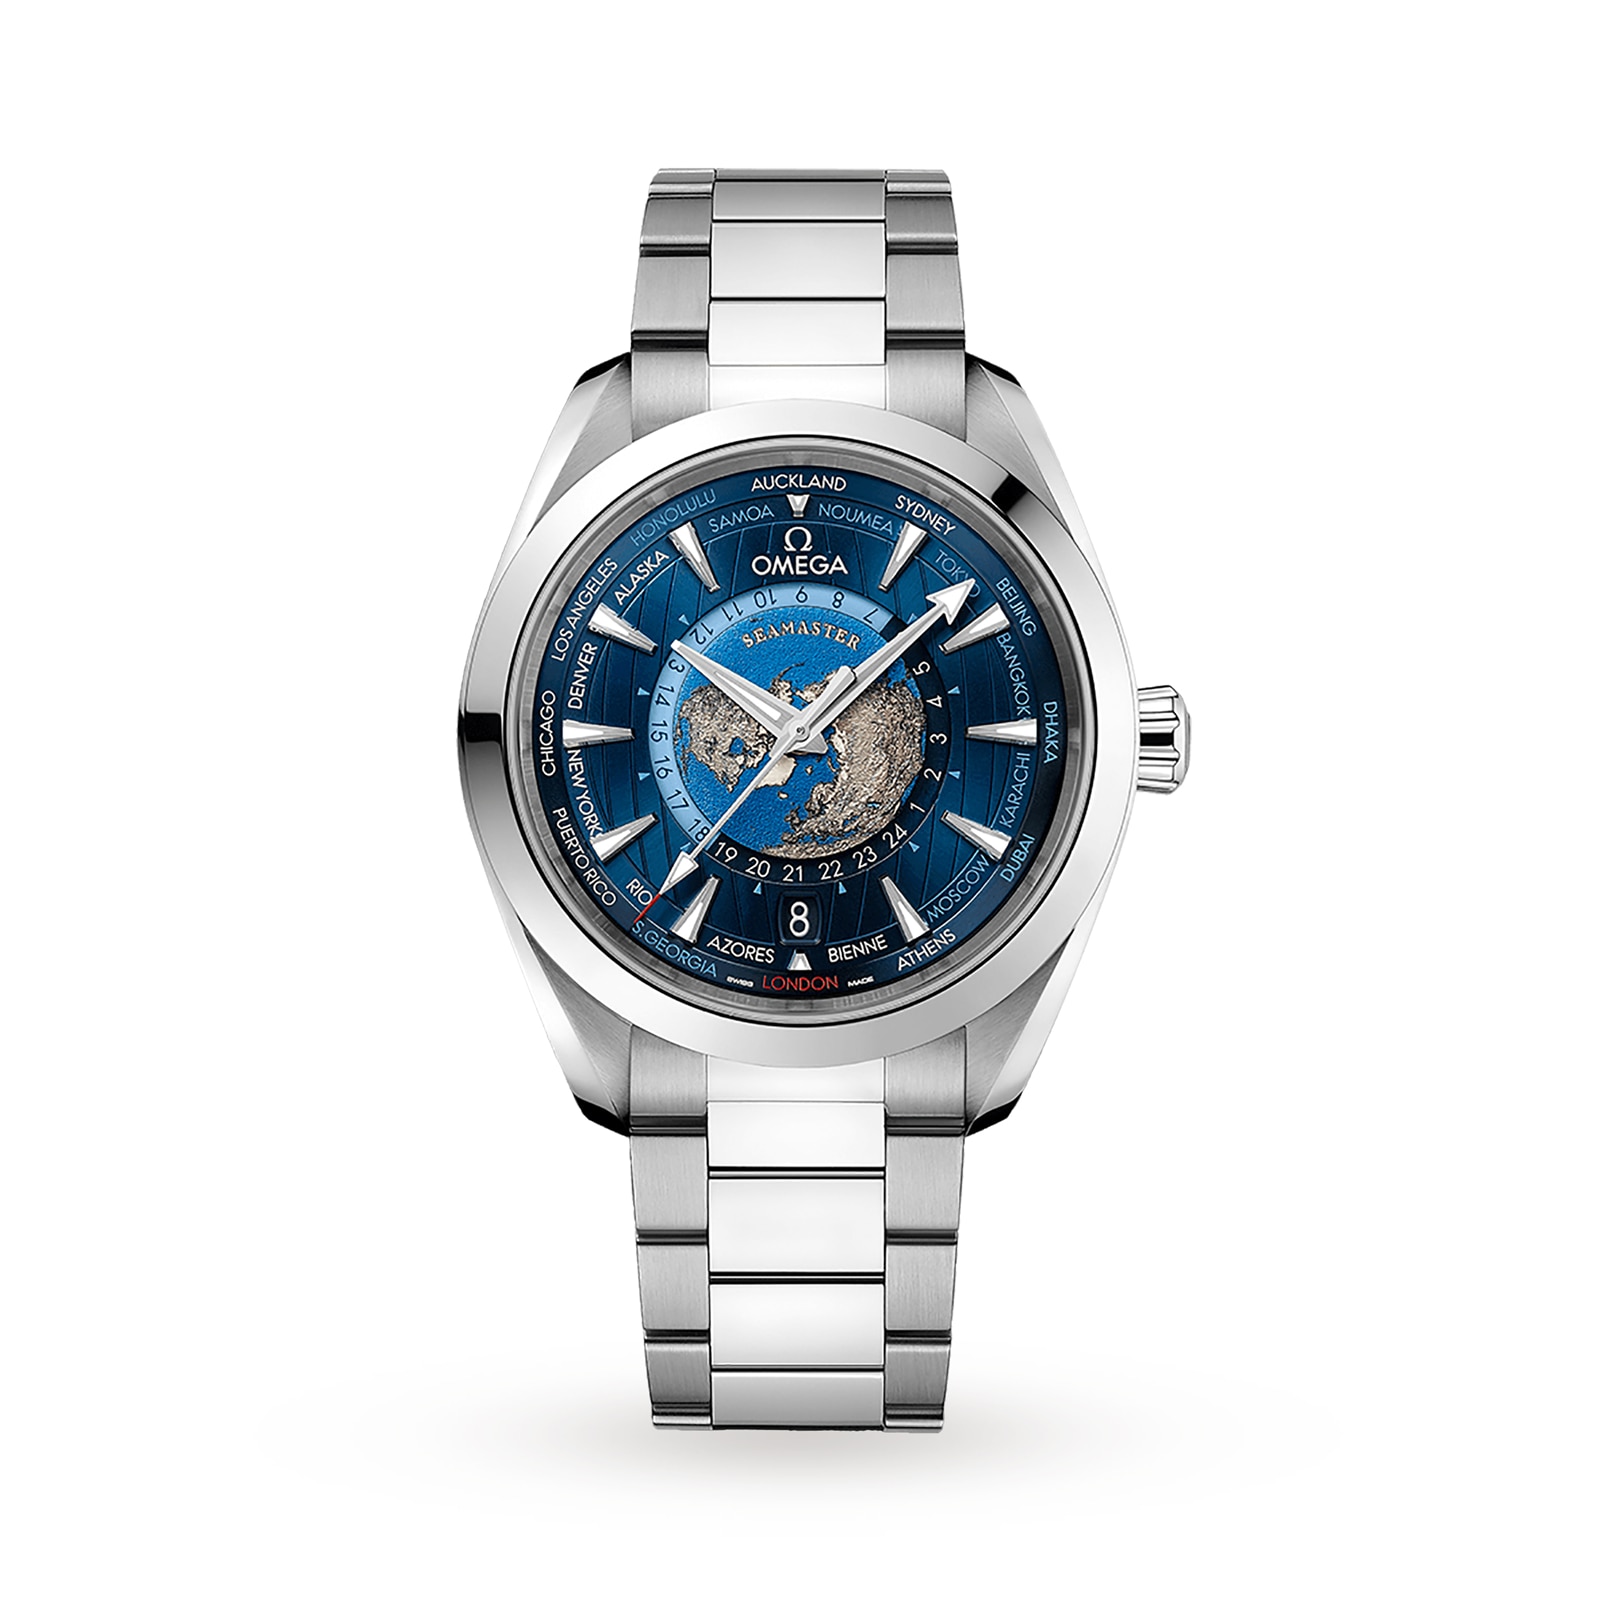 What to Know Before Buying the Omega Aqua Terra